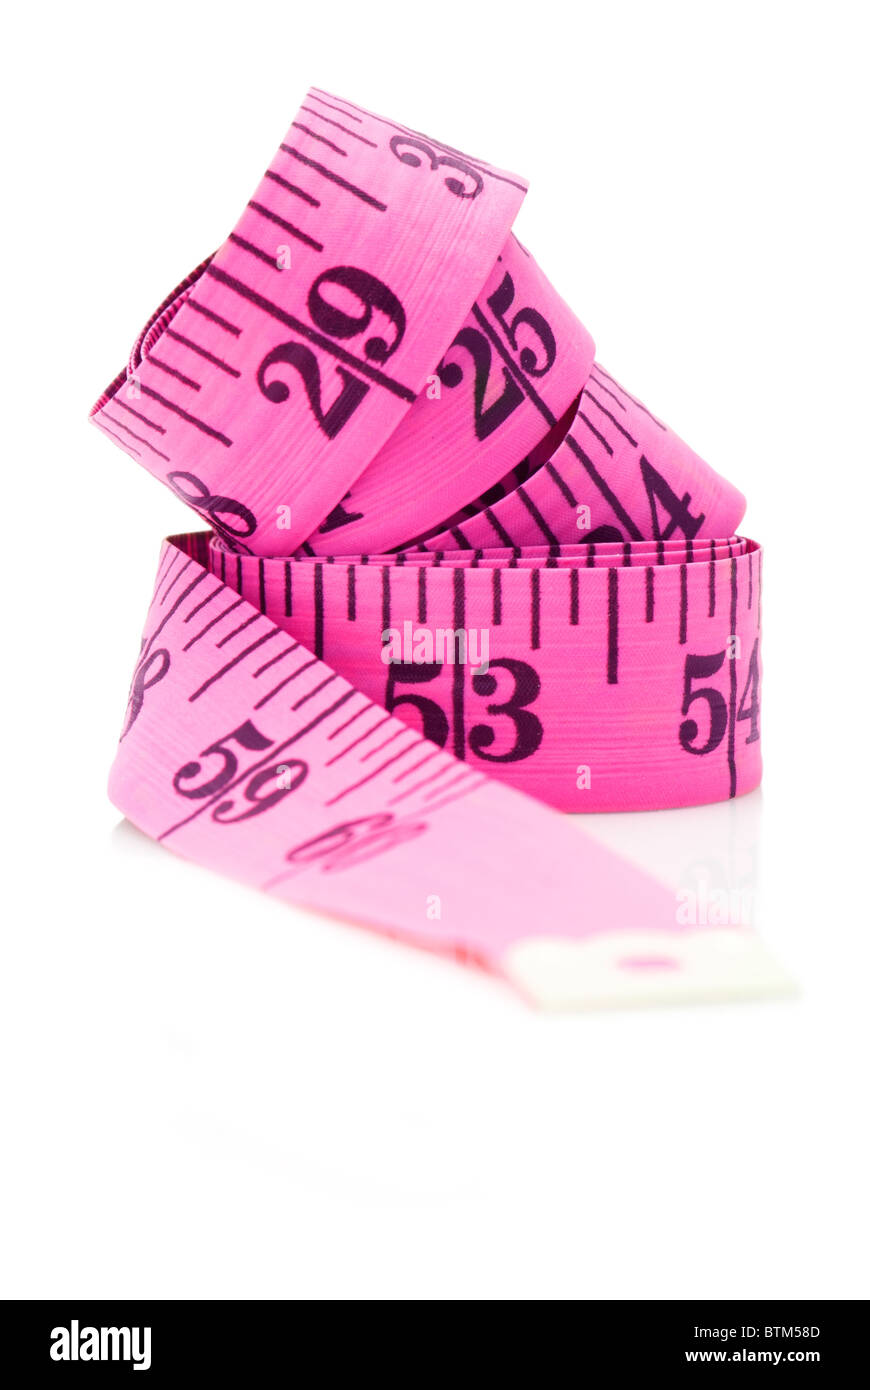 Inch scale pink measuring tape on white background Stock Photo